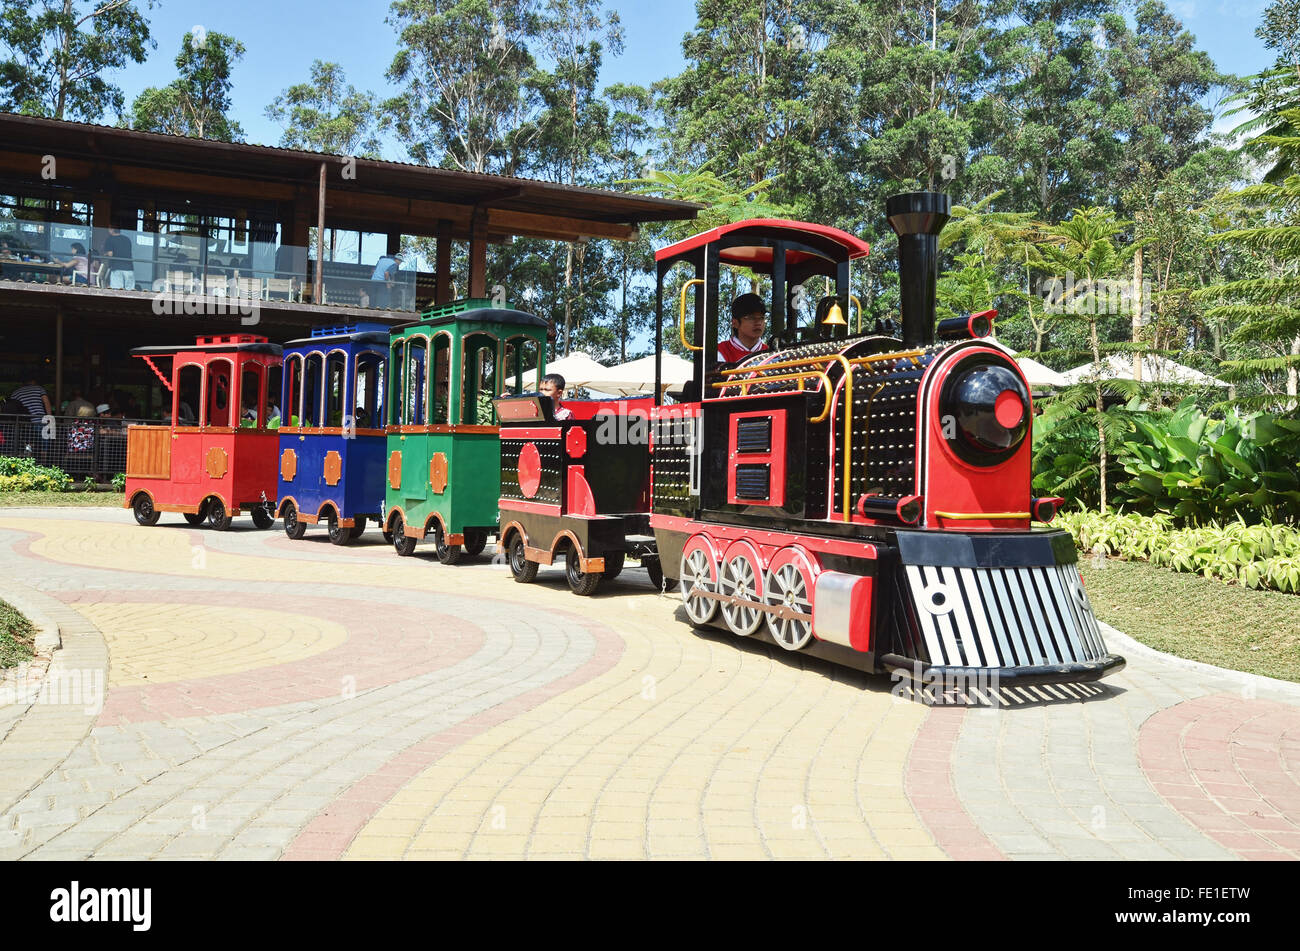 A colorful train for kids Stock Photo